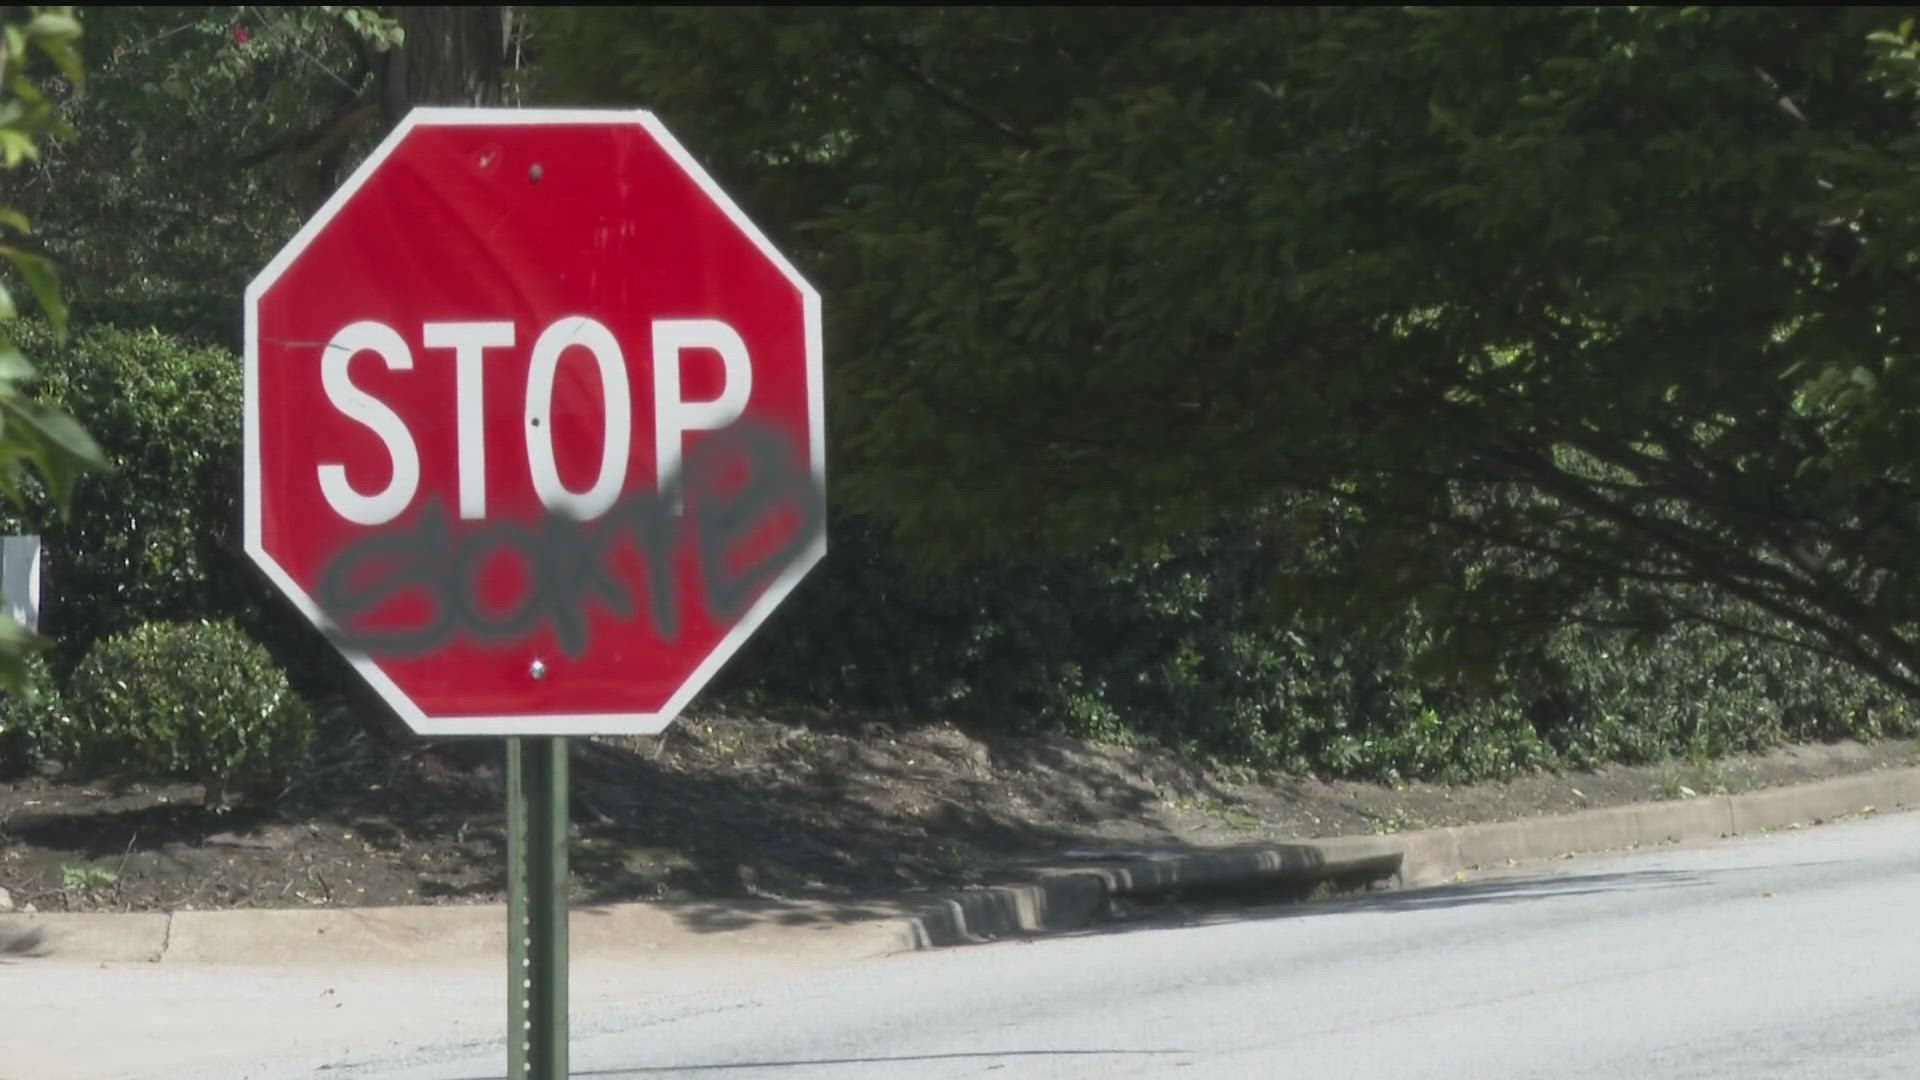 In one study, graffiti caused the self-driving vehicle technology to read a stop sign as a 45 miles per hour sign.